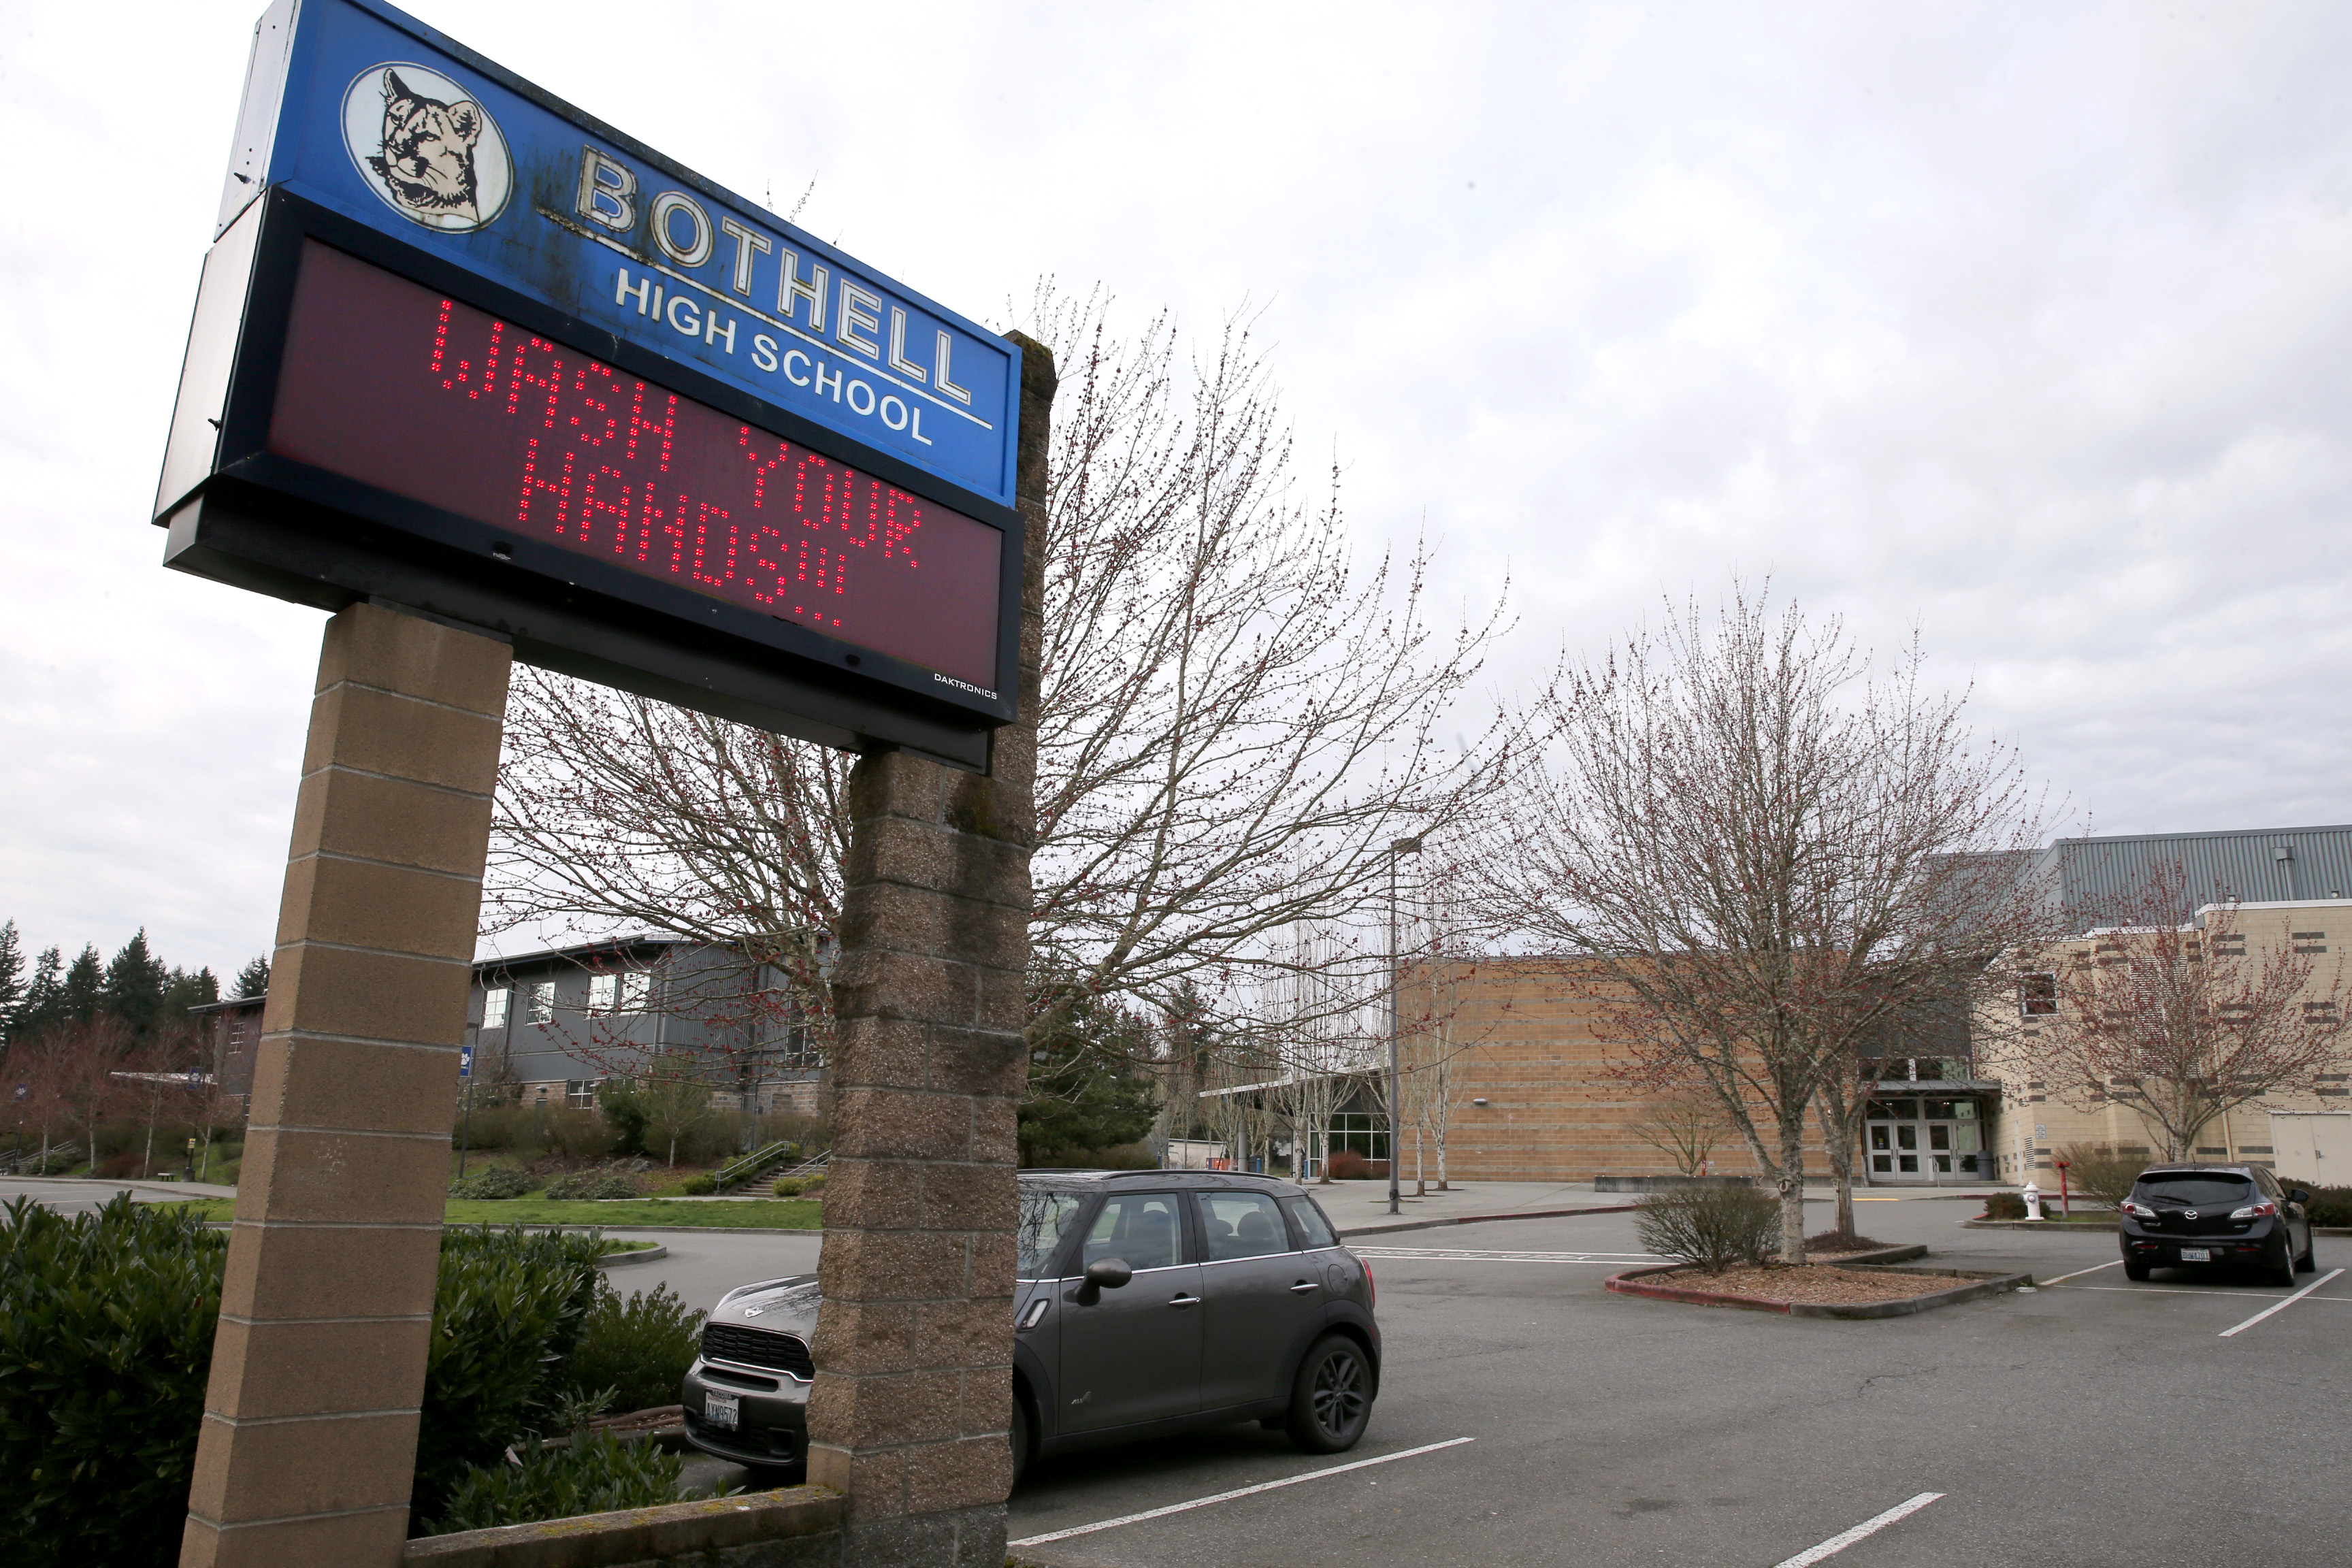 A sign outside Bothell High School in Bothell, Washington, on March 5, 2020, shortly before the school district closed classrooms and transitioned to online learning temporarily out of concerns about the coronavirus. (Karen Ducey—Getty Images)